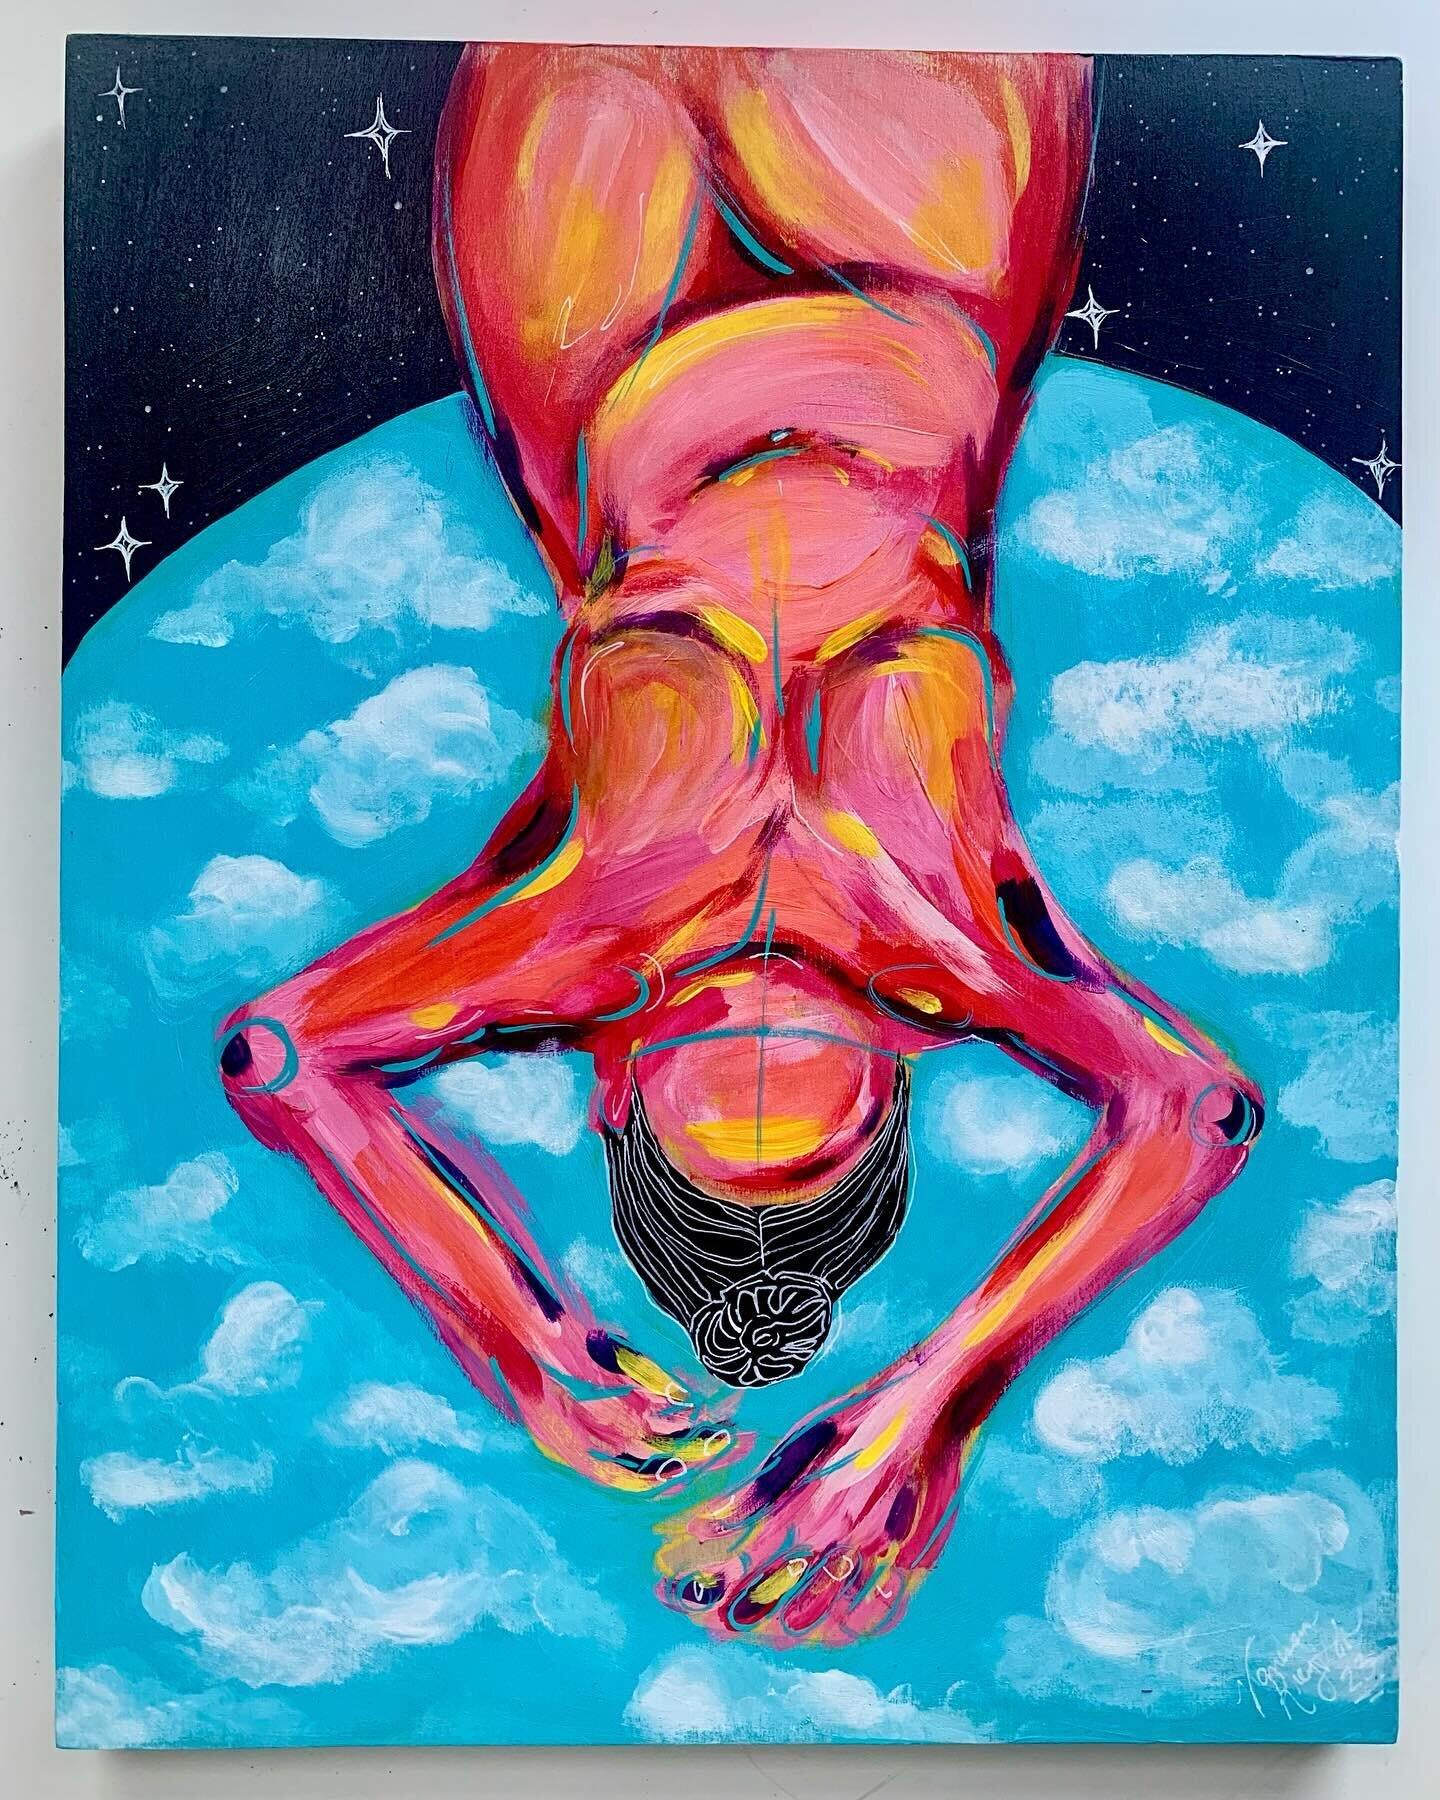 &ldquo;Head in the Clouds&rdquo;
11x14&rdquo;
Acrylic on wood

The Second-Ever @colossalmedia Employees Art Show, Fresh Air, has come and gone, but you can still check out such amazing pieces (including this one💖) from the staff until March 2024. 
I